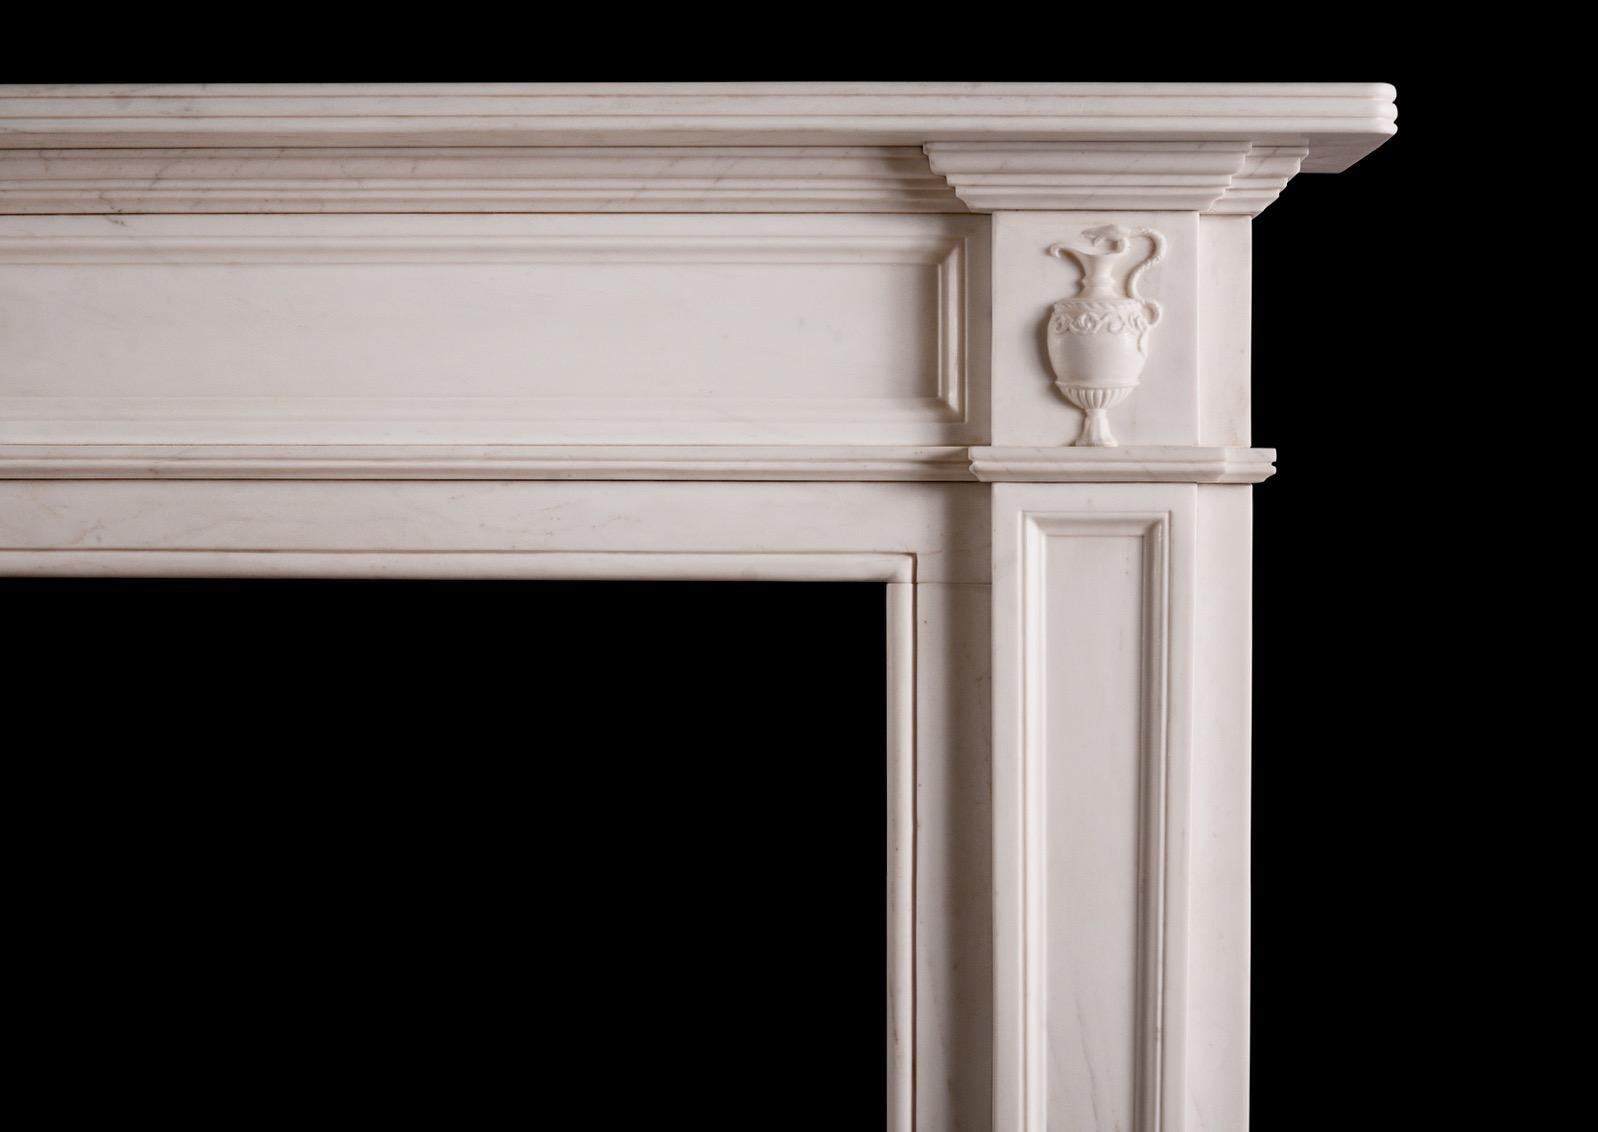 A Regency style fireplace in white marble. The tapering panelled jambs surmounted by classical urns to side blockings, the panelled frieze surmounted by reeded shelf above. A copy of an earlier piece.

N.B. May be subject to an extended lead time,